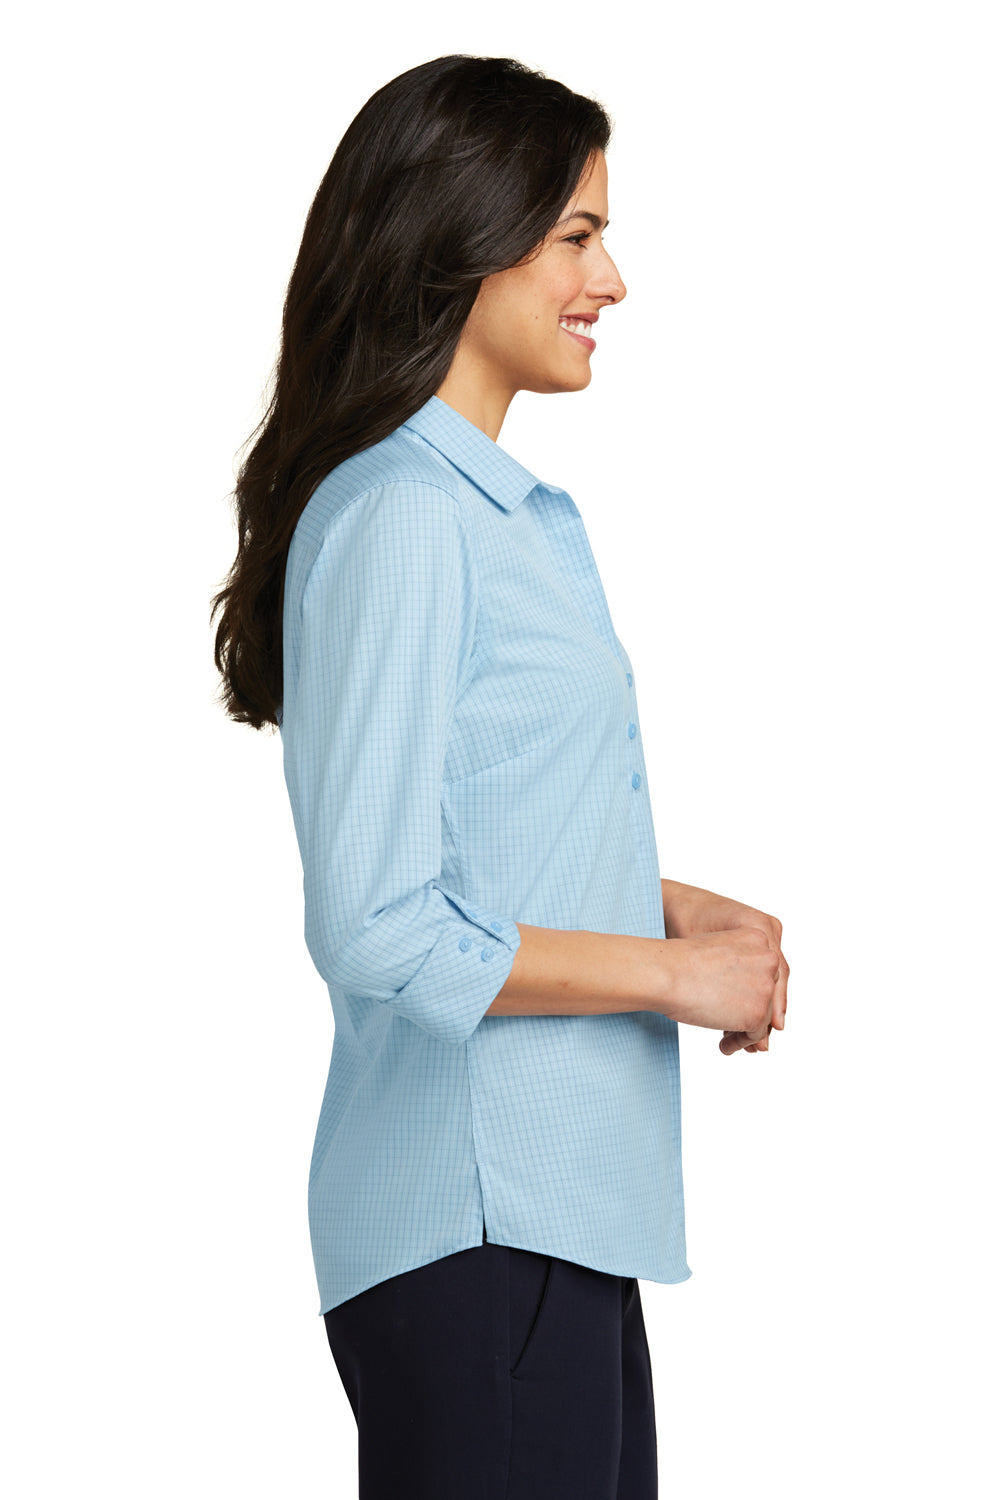 Port Authority LW643 Womens Easy Care Wrinkle Resistant 3/4 Sleeve Button Down Shirt Heritage Blue/Royal Blue Side